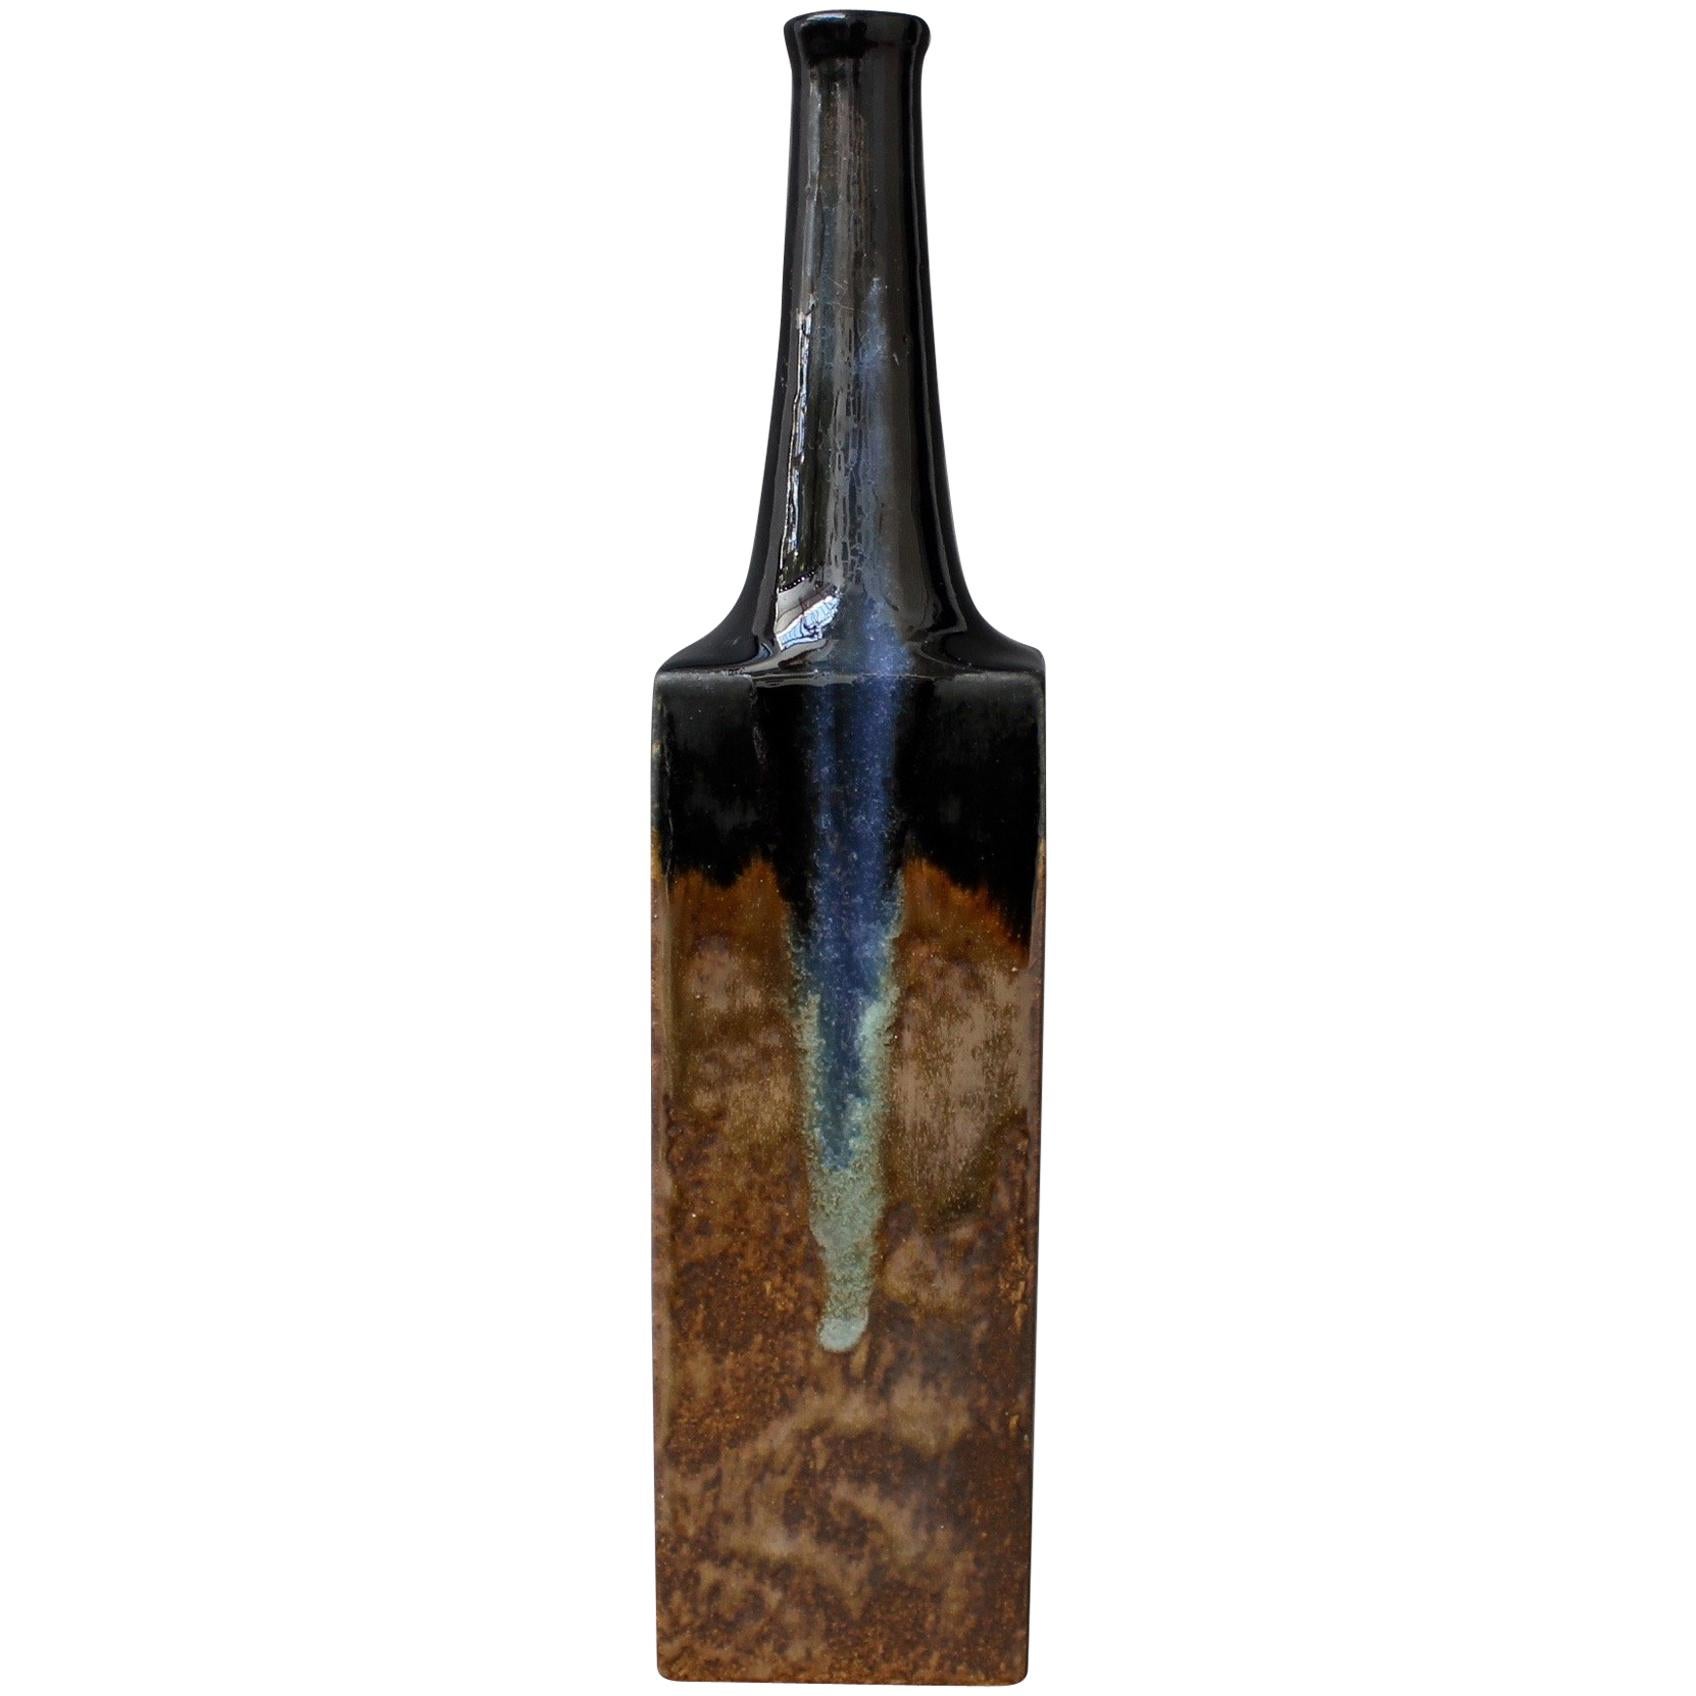 Black and Chocolate Brown Ceramic Bottle-Shaped Vase by Bruno Gambone, c. 1980s For Sale